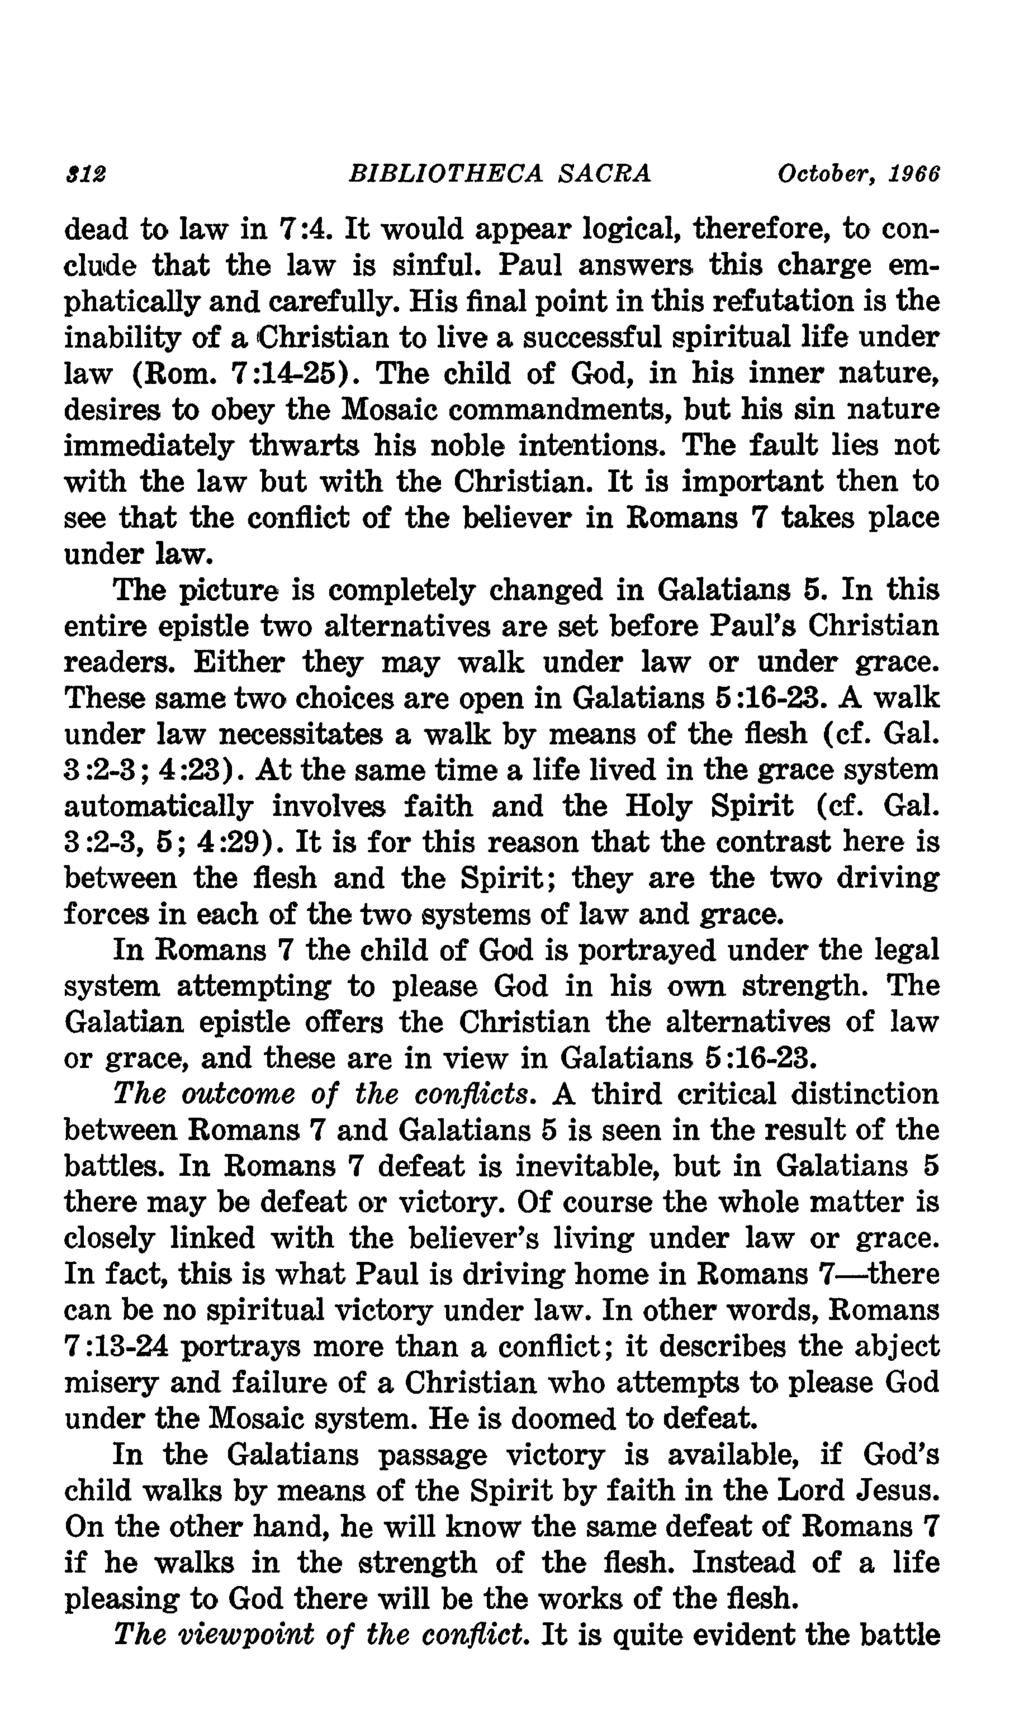 812 BIBLIOTHECA SACRA October, 1966 dead to law in 7:4. It would appear logical, therefore, to conclude that the law is sinful. Paul answers this charge emphatically and carefully.